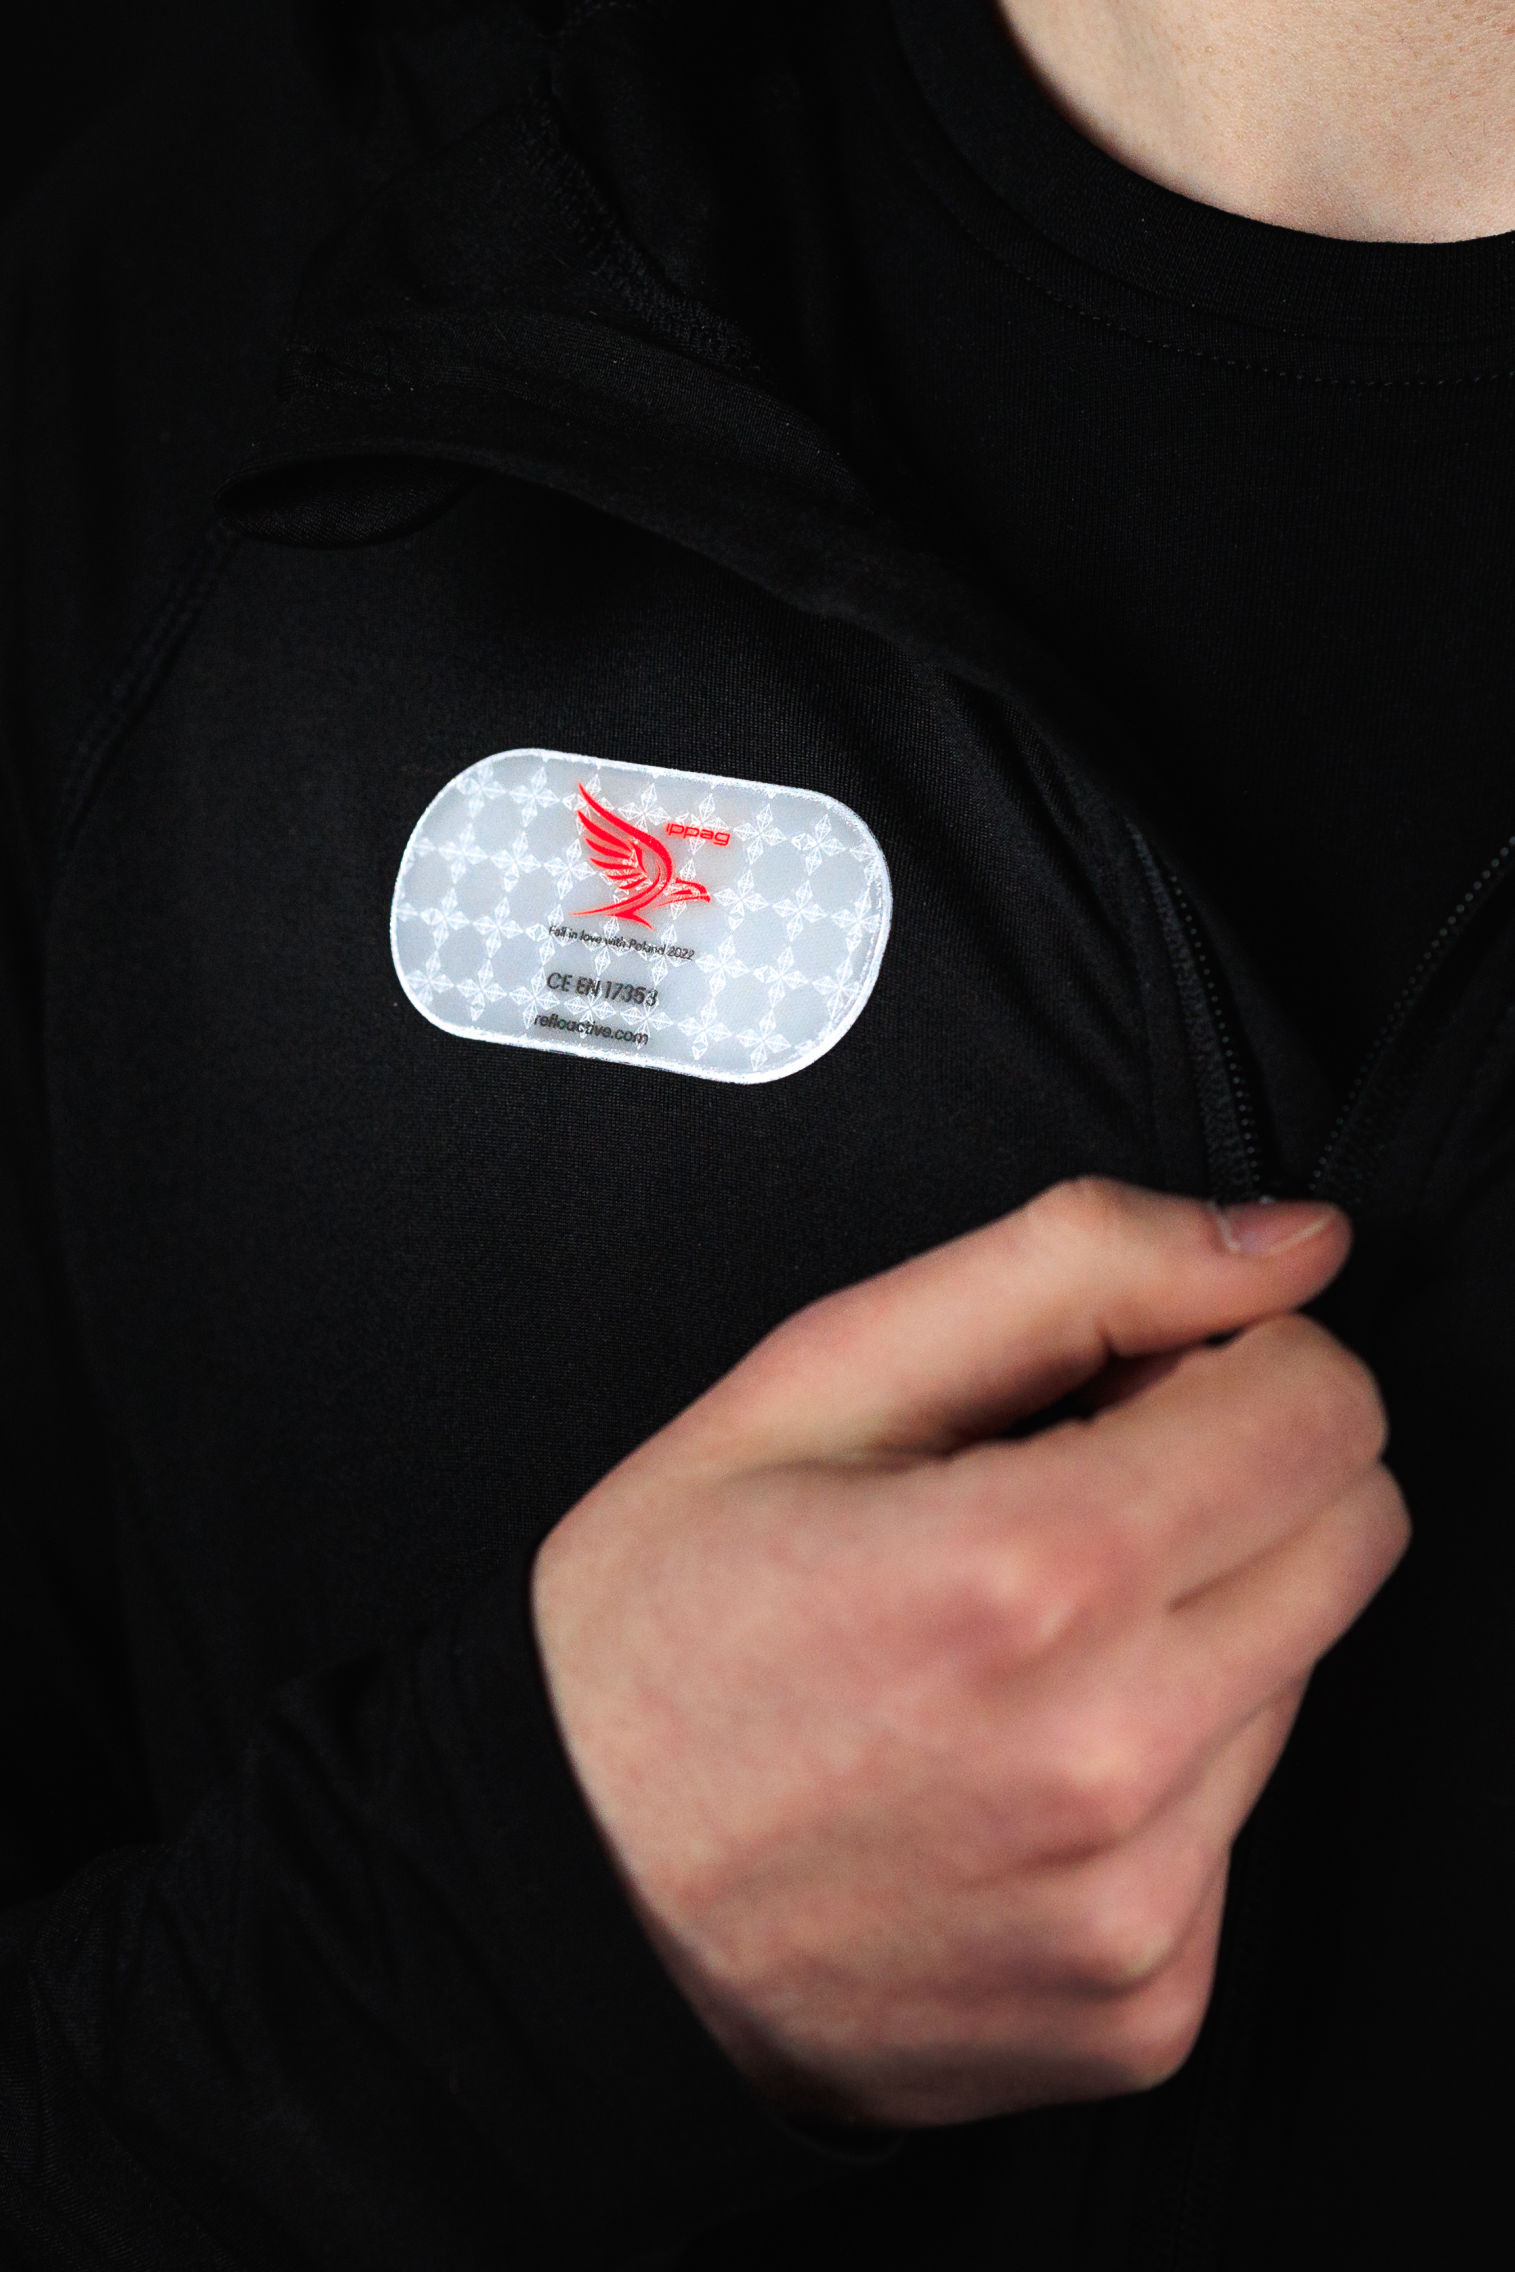 Reflective sticker with logo on certified foil